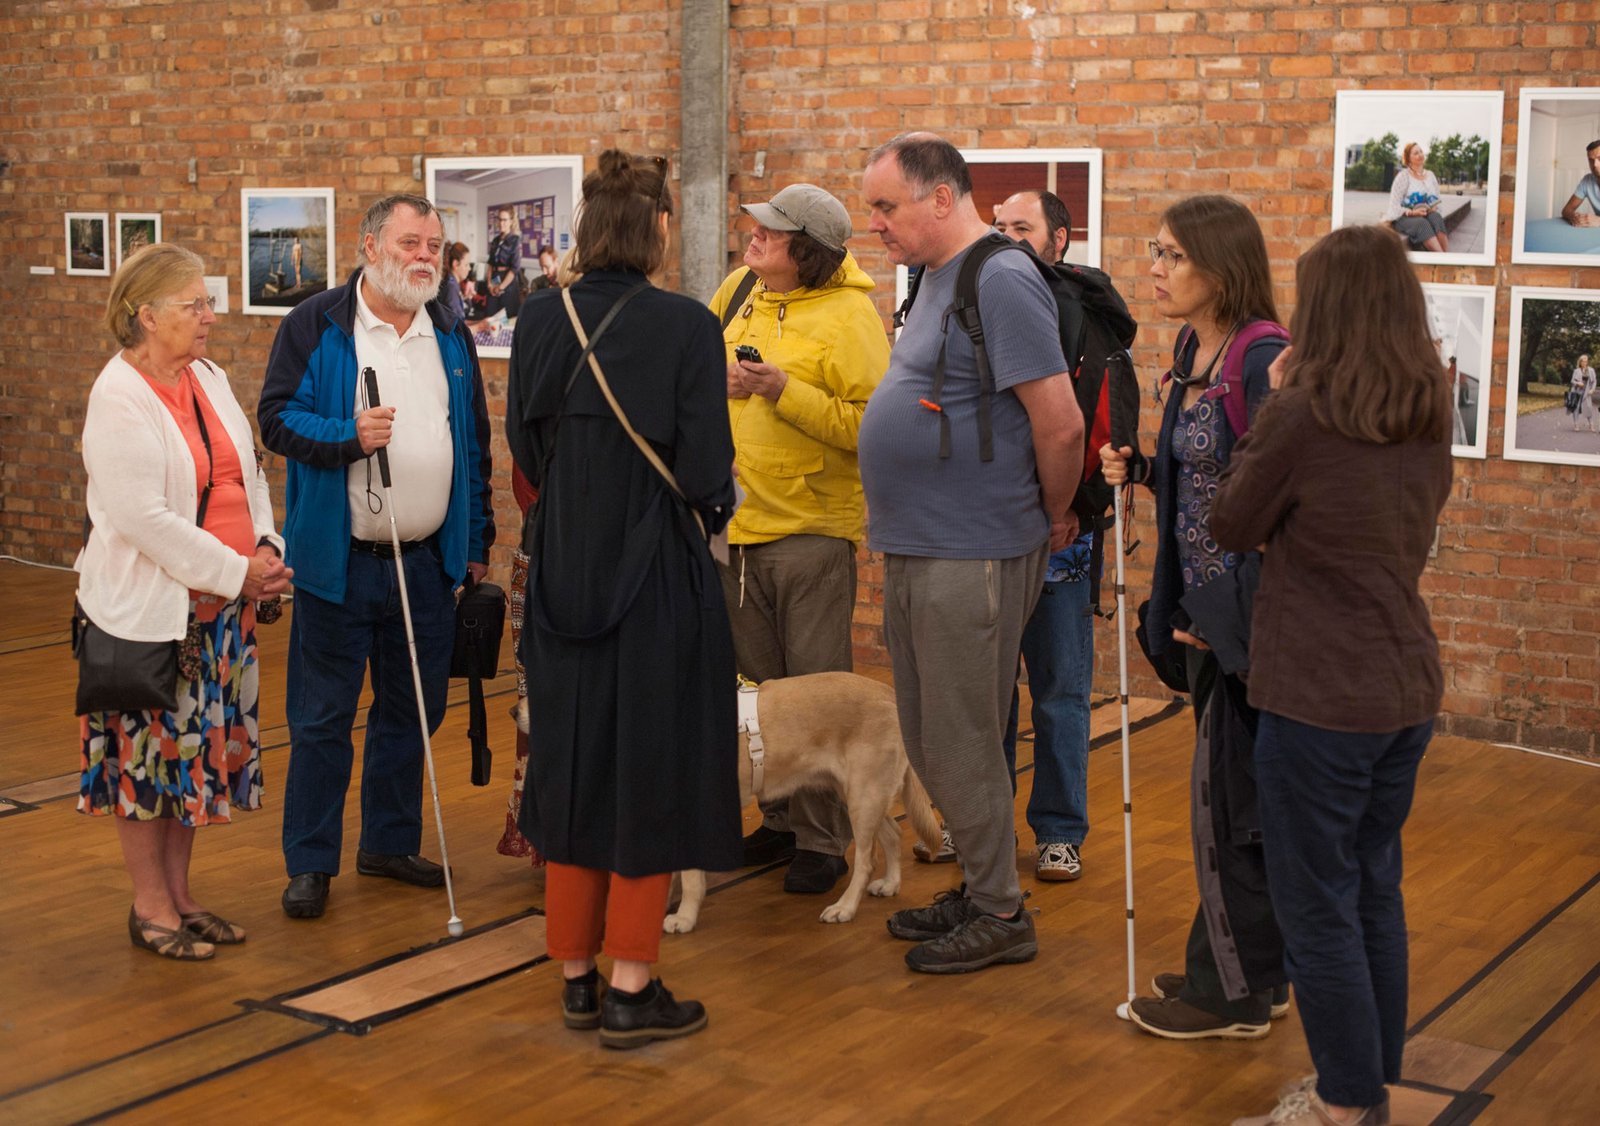 A group of people, two with canes, one with a guide dog, stand in front of a wall of photographs.